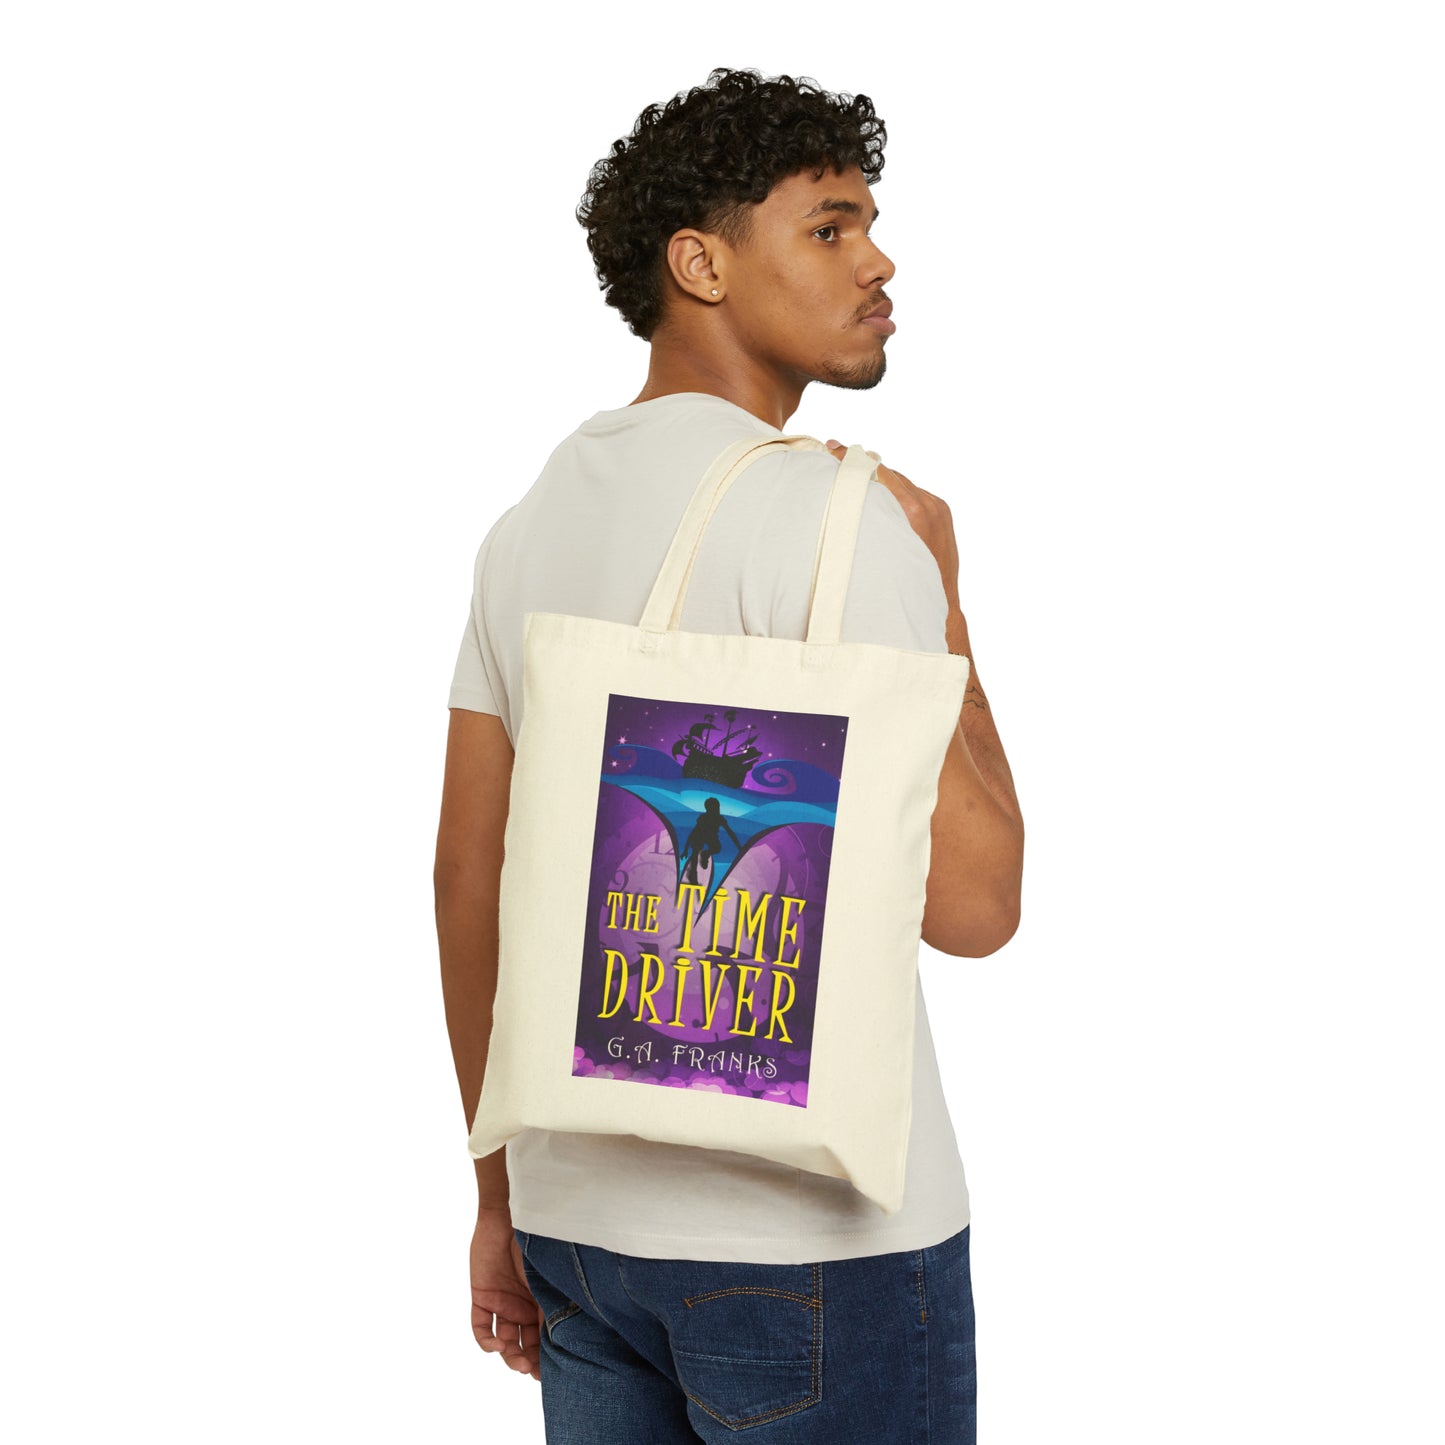 The Time Driver - Cotton Canvas Tote Bag